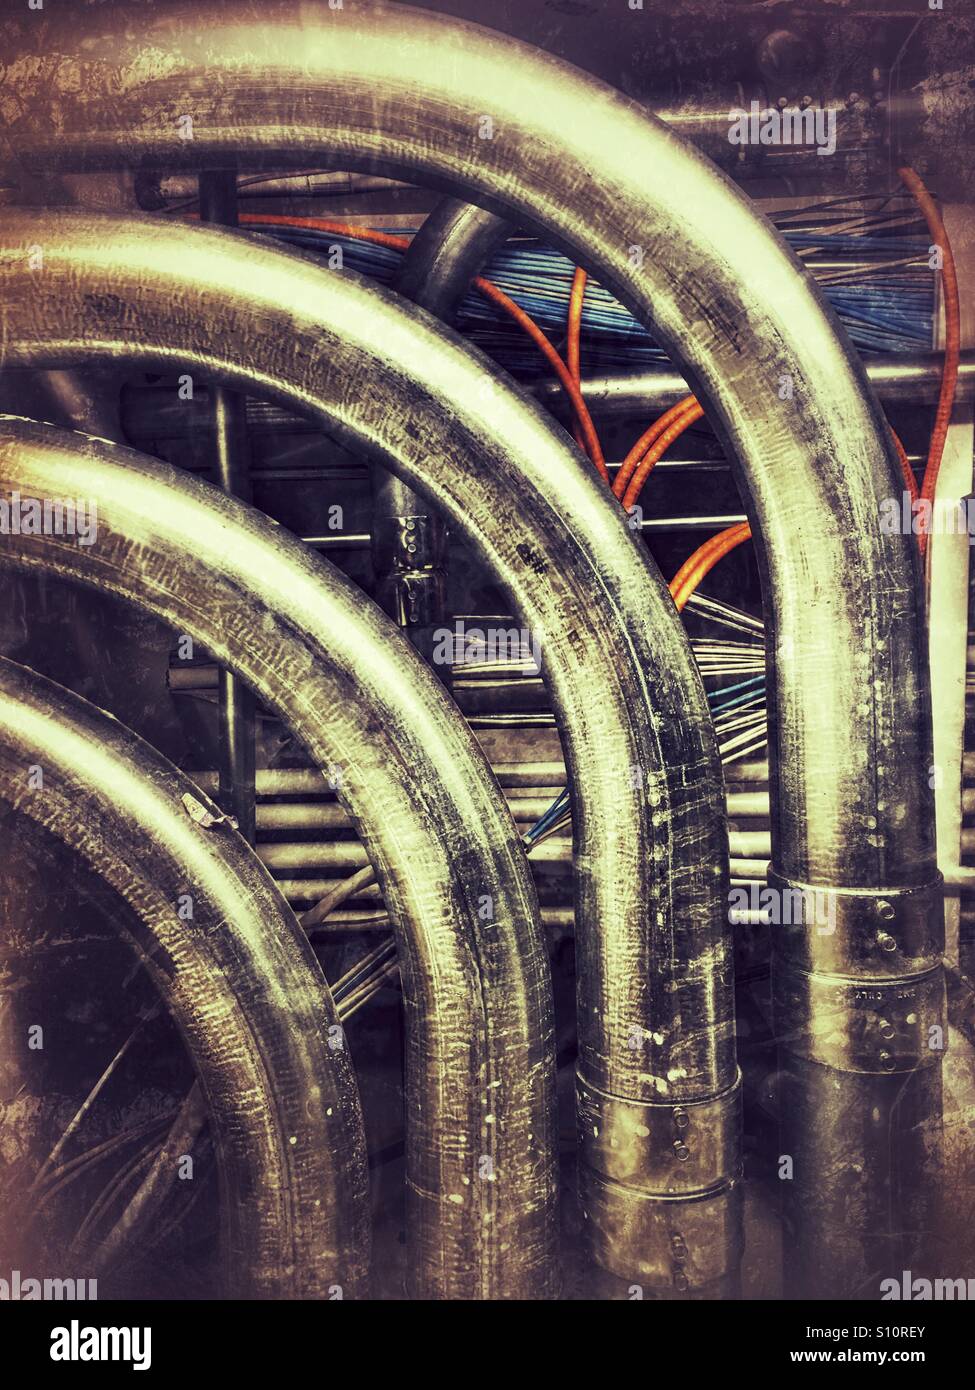 Maze of conduit and networking cables in a commercial building Stock Photo